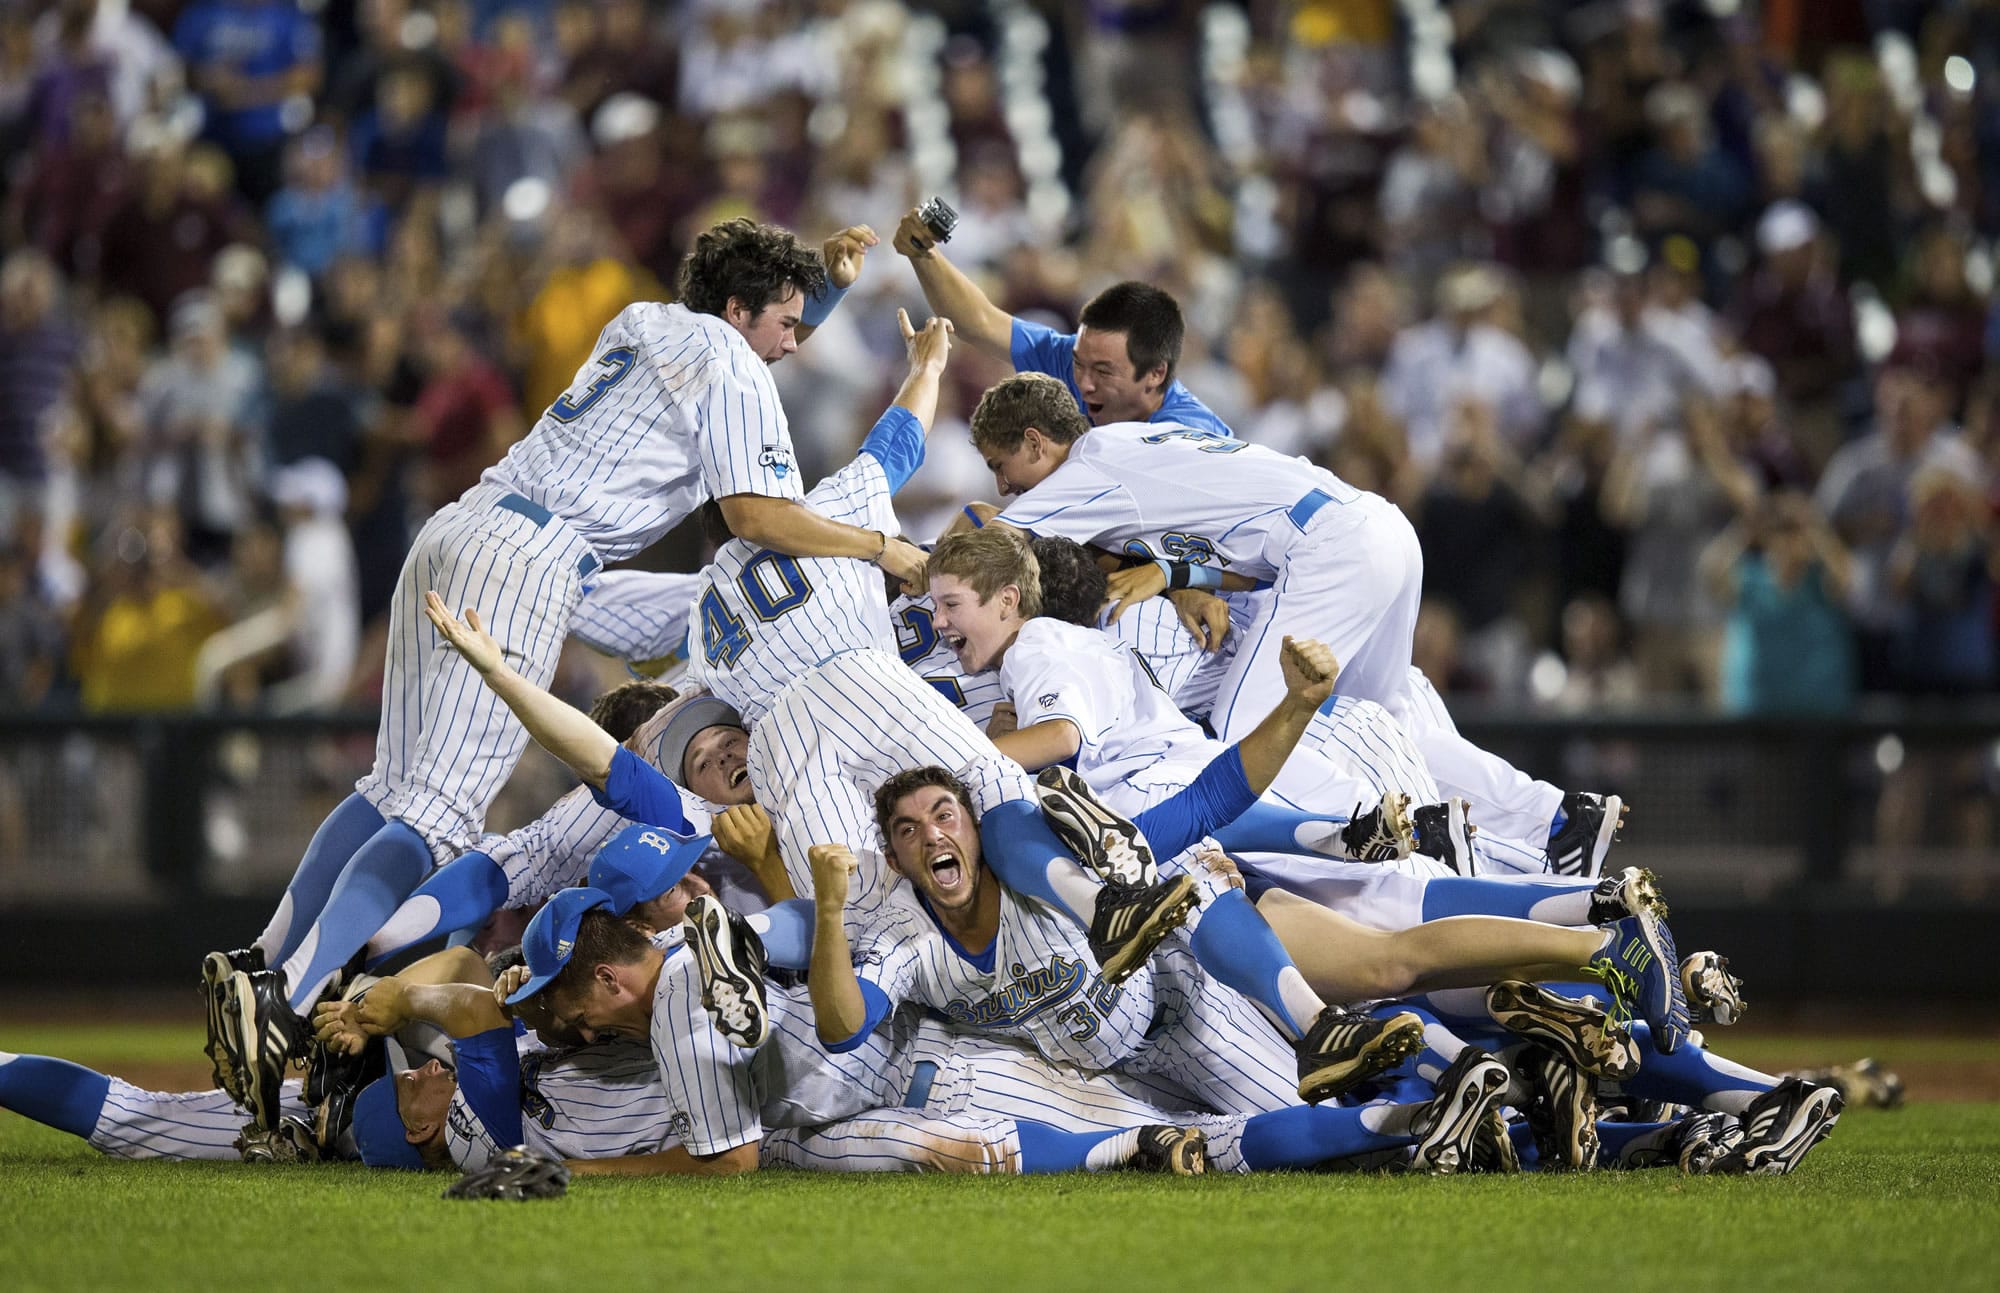 UCLA players celebrate winning the College World Series title after defeated Mississippi State 8-0 in Game 2 at Omaha, Neb., sweeping the best-of-three series.